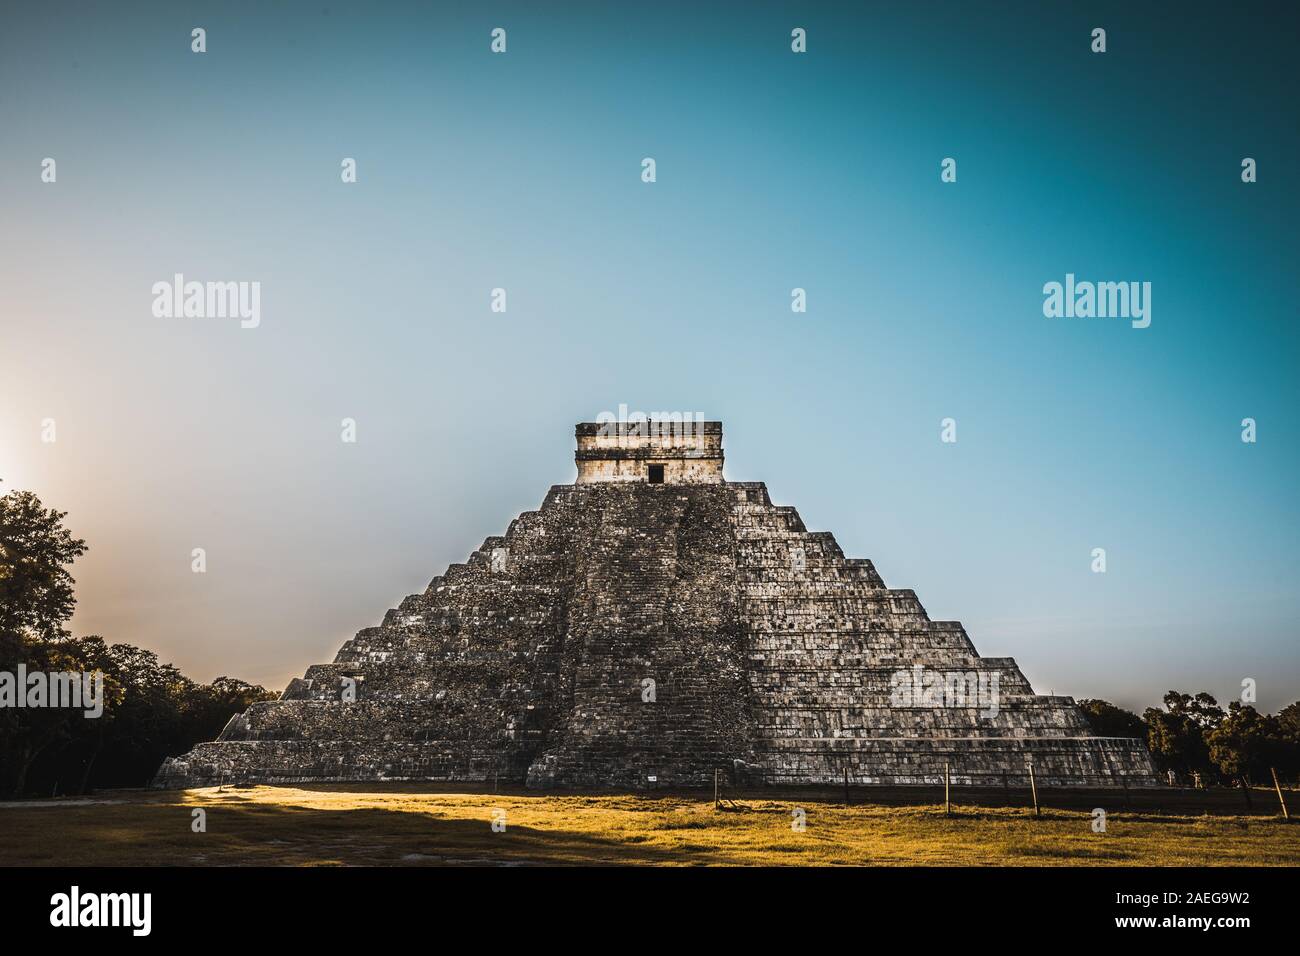 Chichen Itza was a large pre-Columbian city built by the Maya people. The archaeological site is located in Yucatán State, Mexico Stock Photo